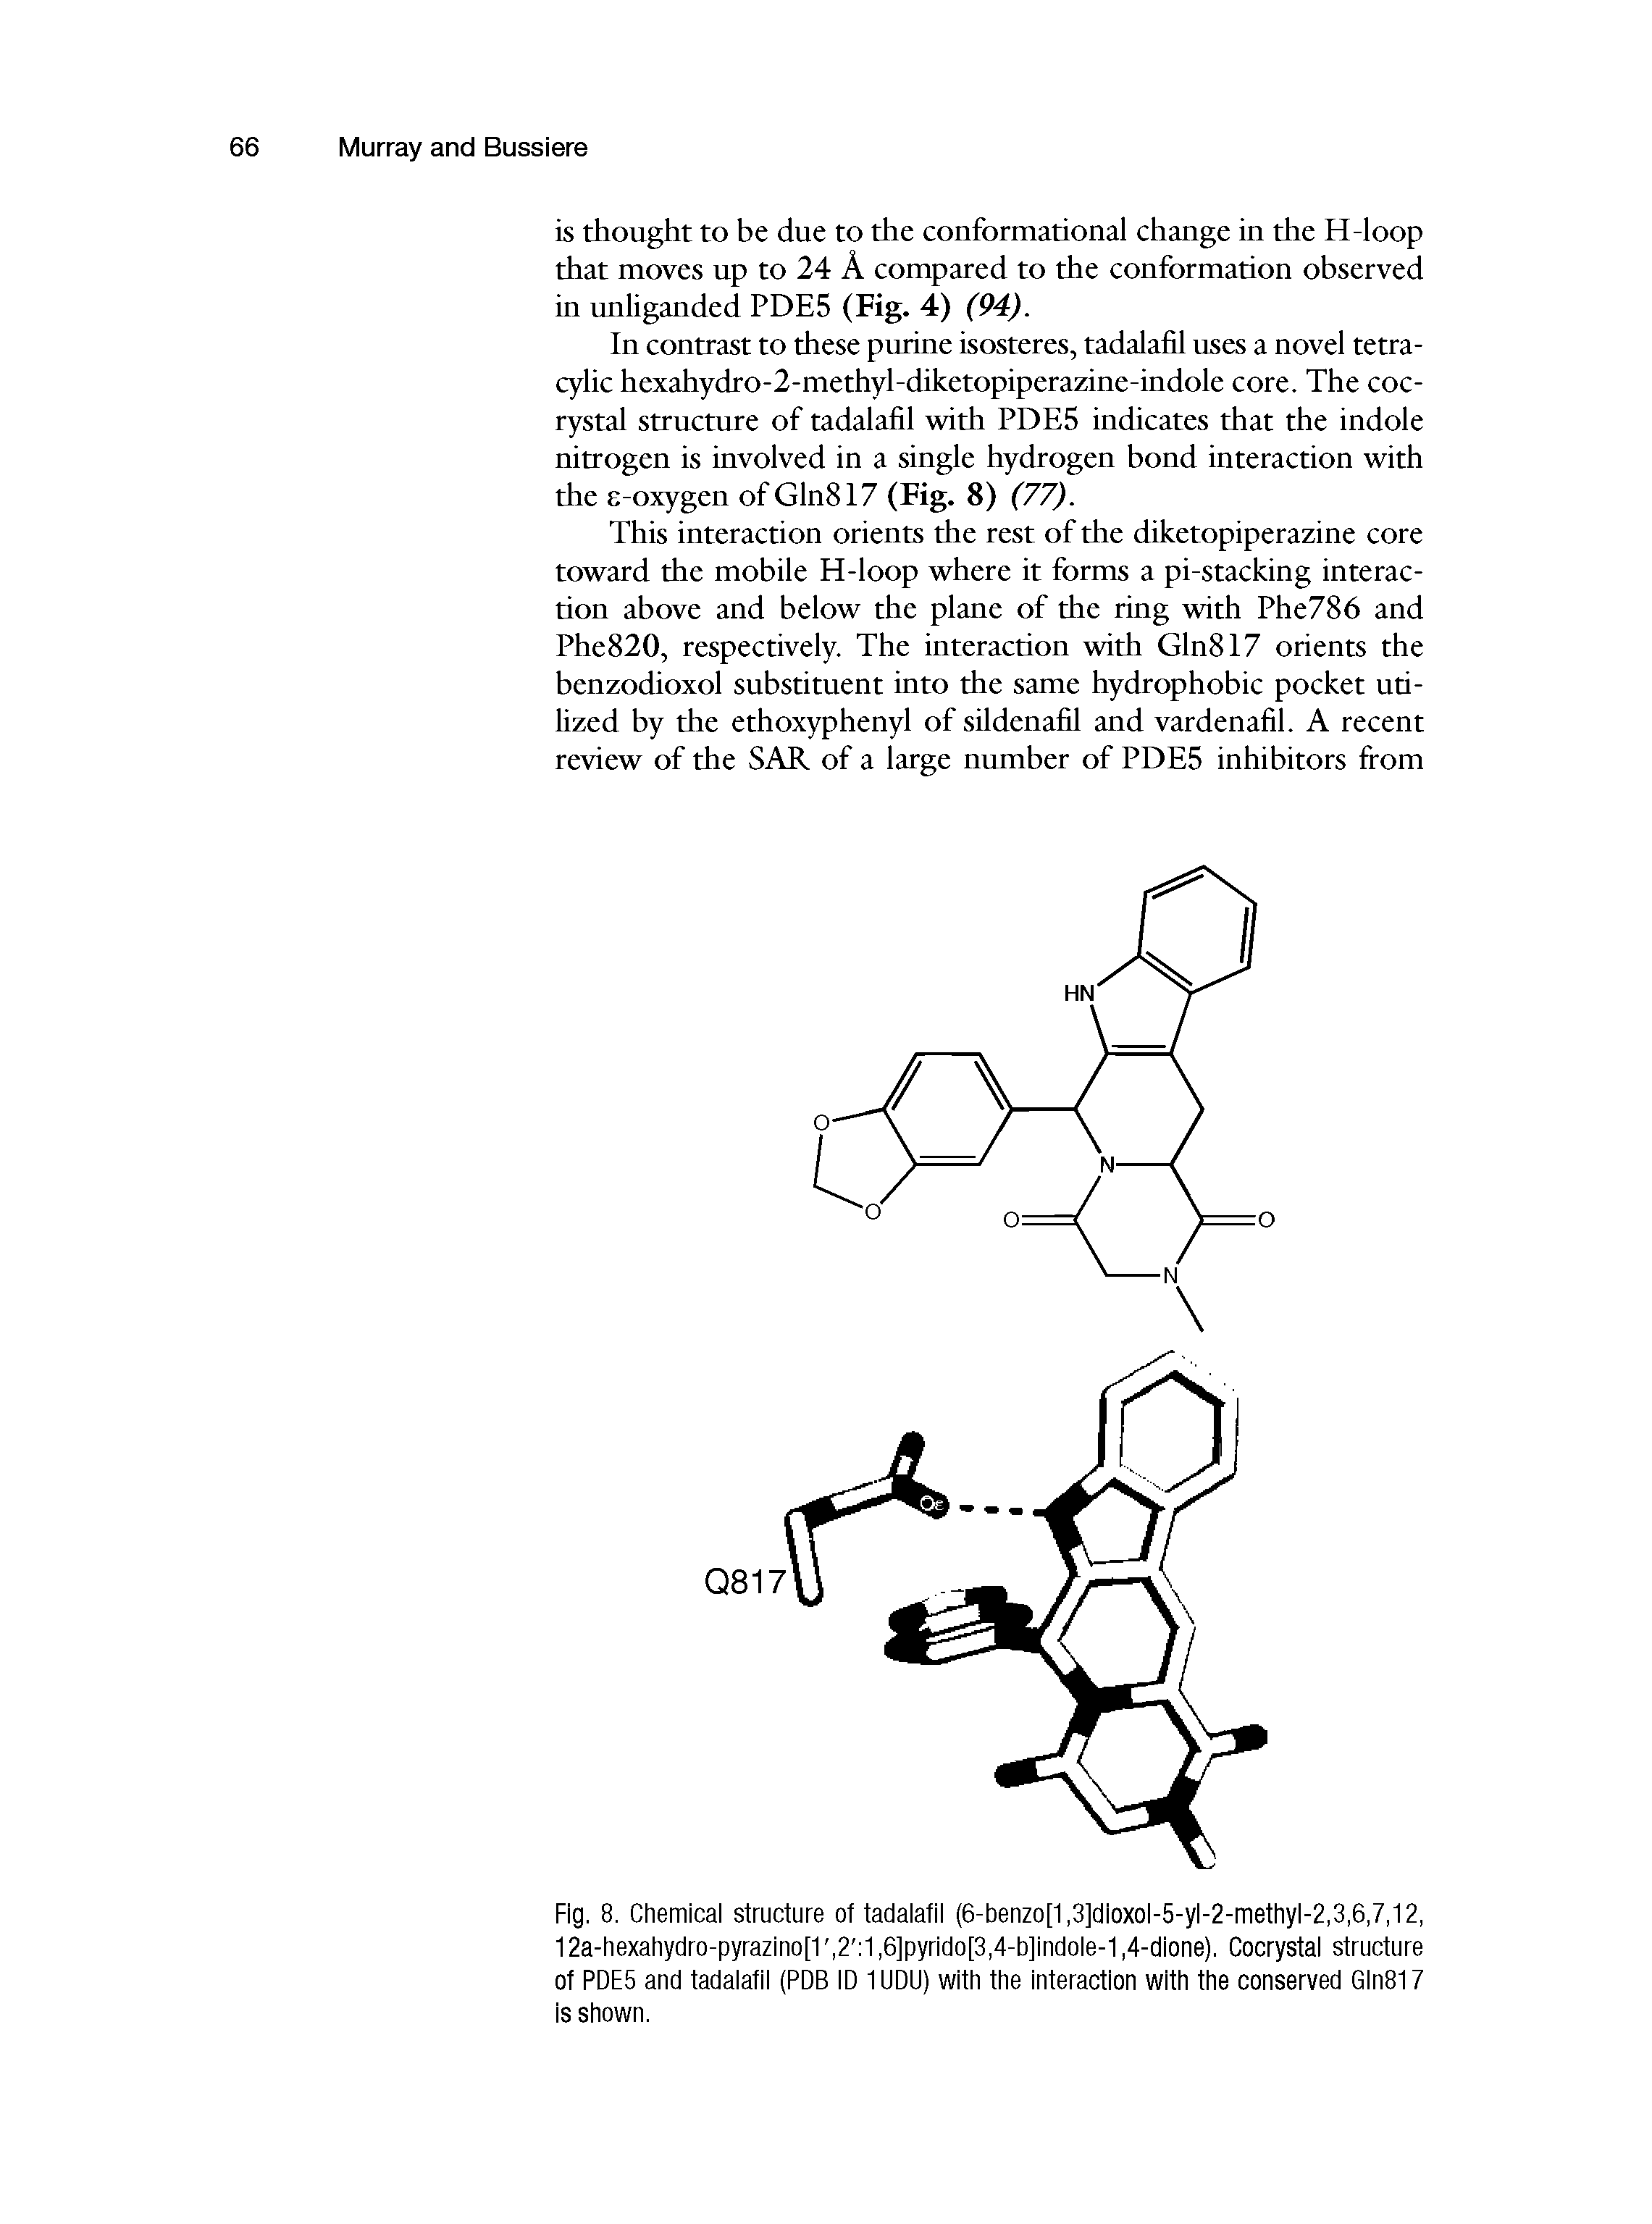 Fig. 8. Chemical structure of tadalafil (6-benzo[1,3]dioxol-5-yl-2-methyl-2,3,6,7,12, 12a-hexahydro-pyrazino[1, 2 1,6]pyrido[3,4-b]indole-1,4-dione). Cocrystal structure of PDE5 and tadalafil (PDB ID 1UDU) with the interaction with the conserved Gln817 is shown.